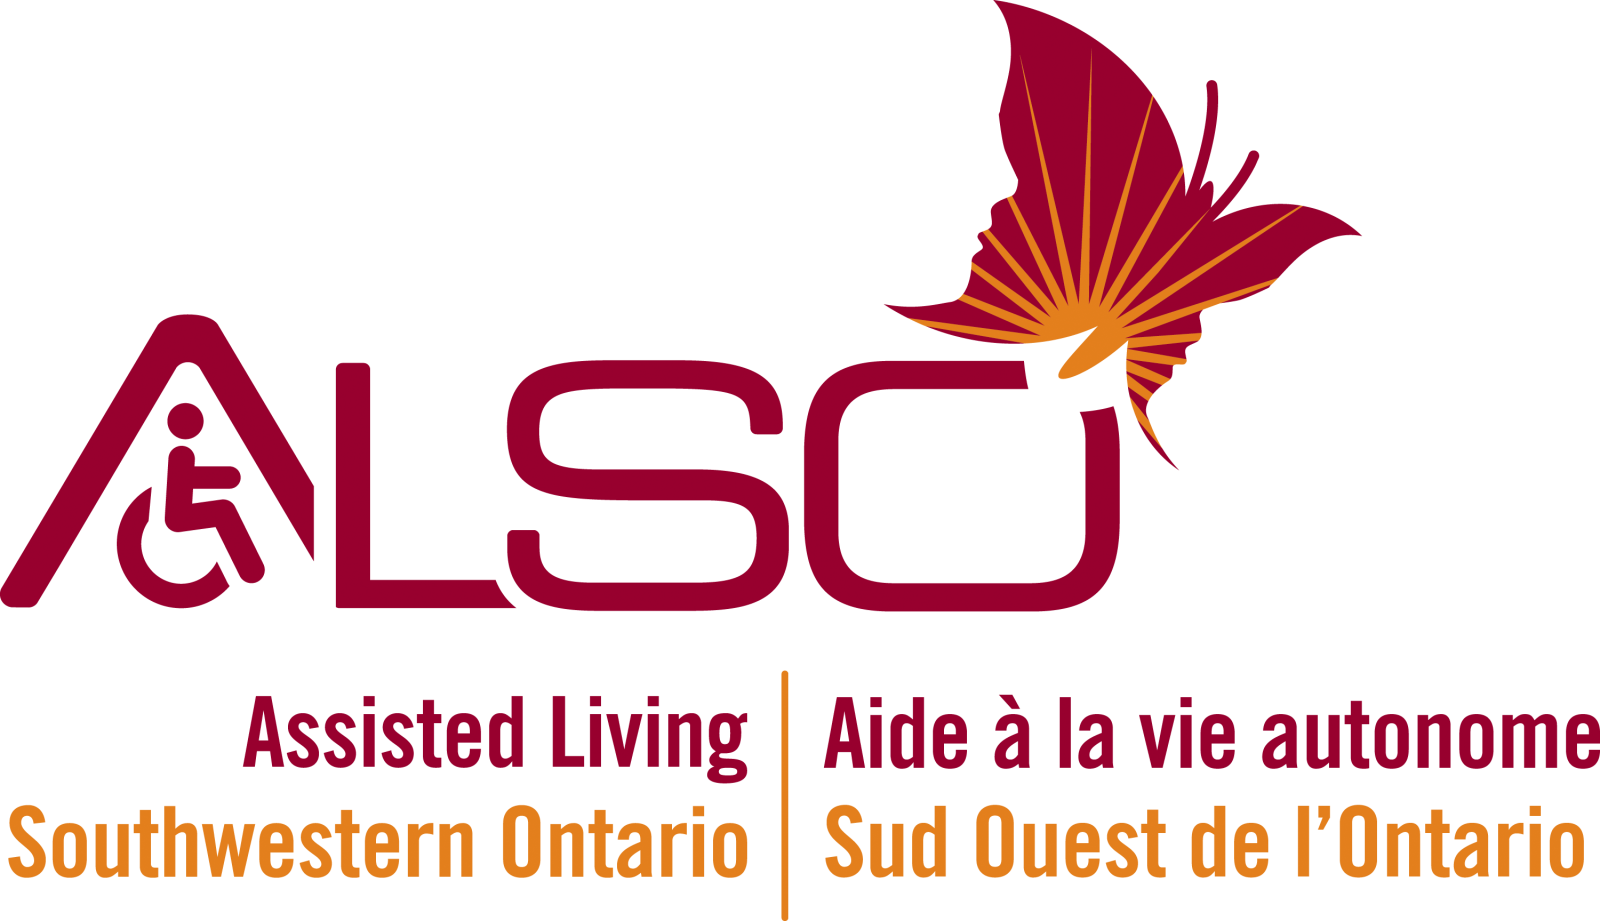 Assisted Living Southwestern Ontario